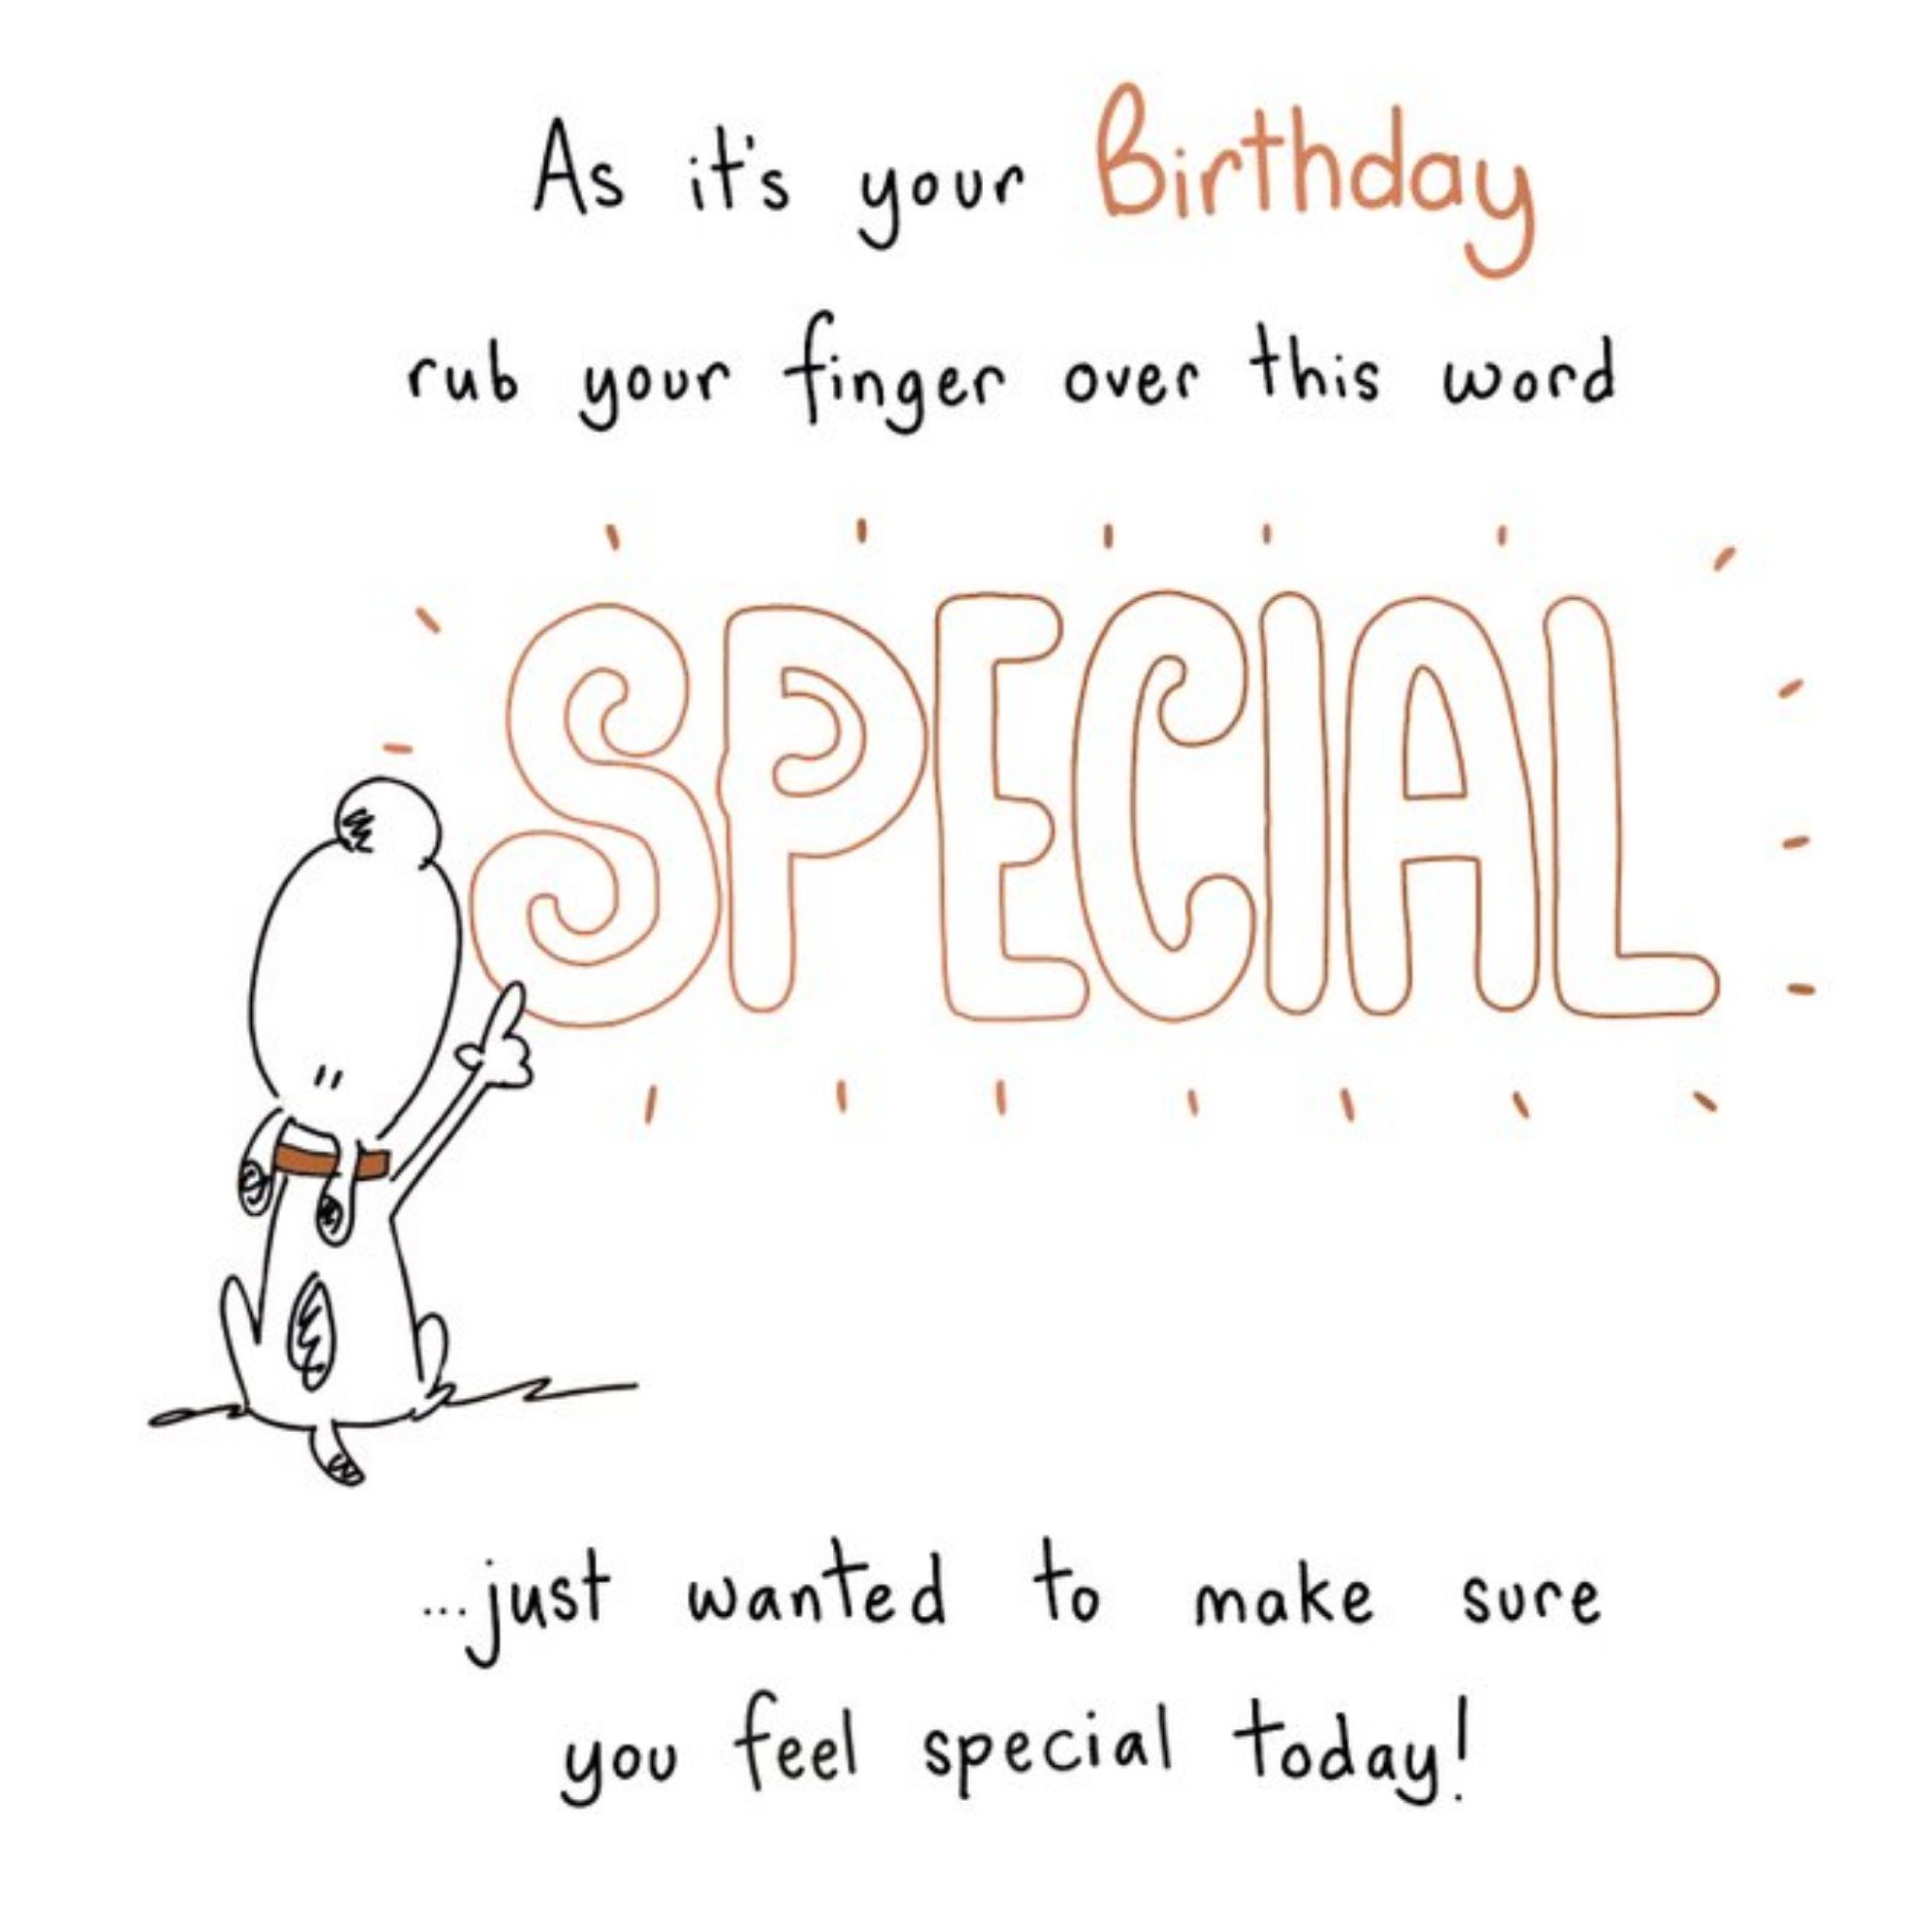 Moonpig Ukg Cute Illustrated Make You Feel Special Birthday Card, Square